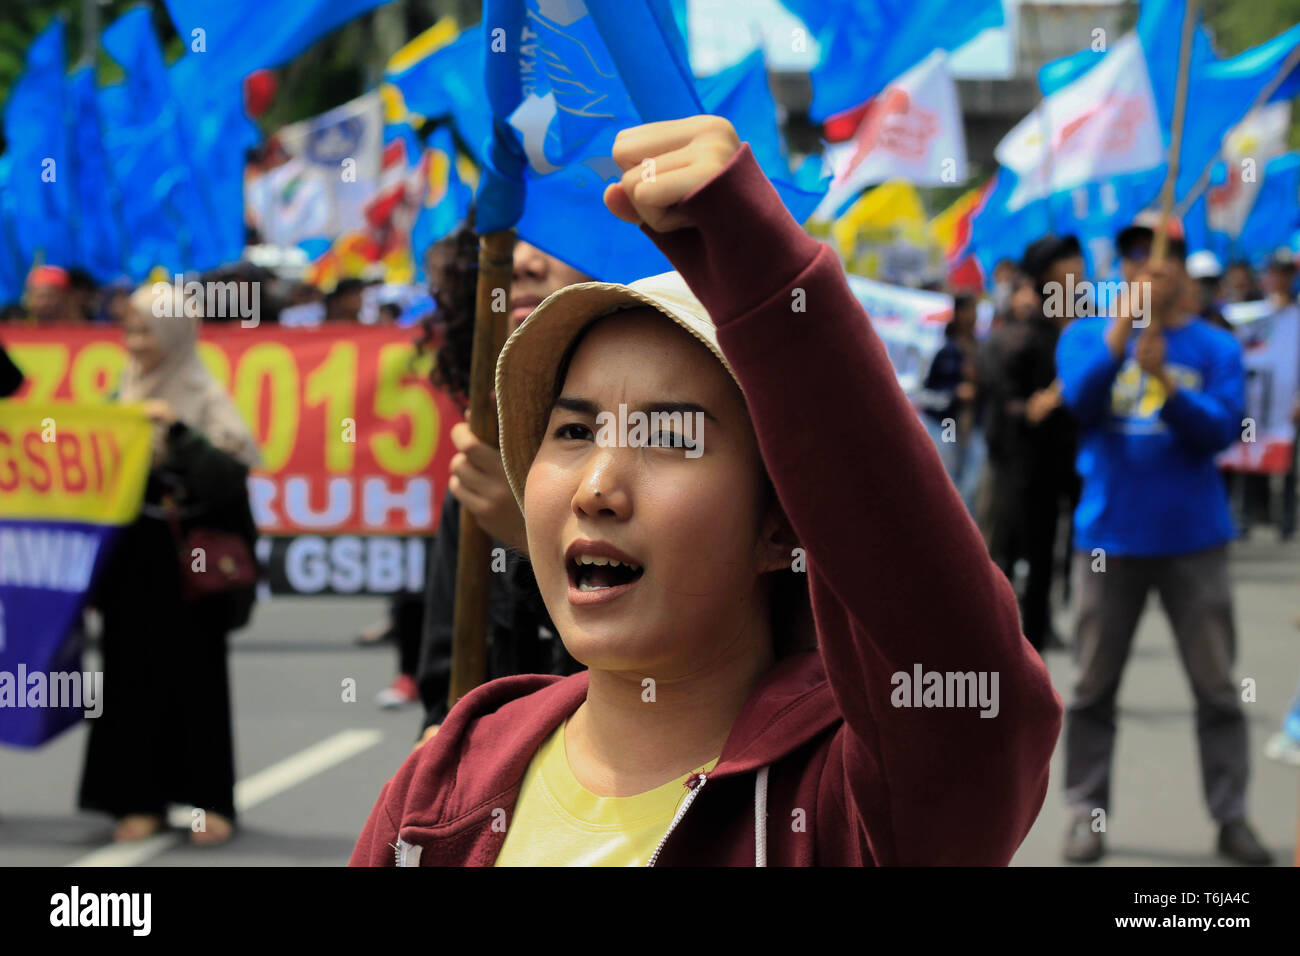 A workers seen shouting slogans during the rally. Thousands of workers are urging the government to raise minimum wages and to improve working conditions. Stock Photo